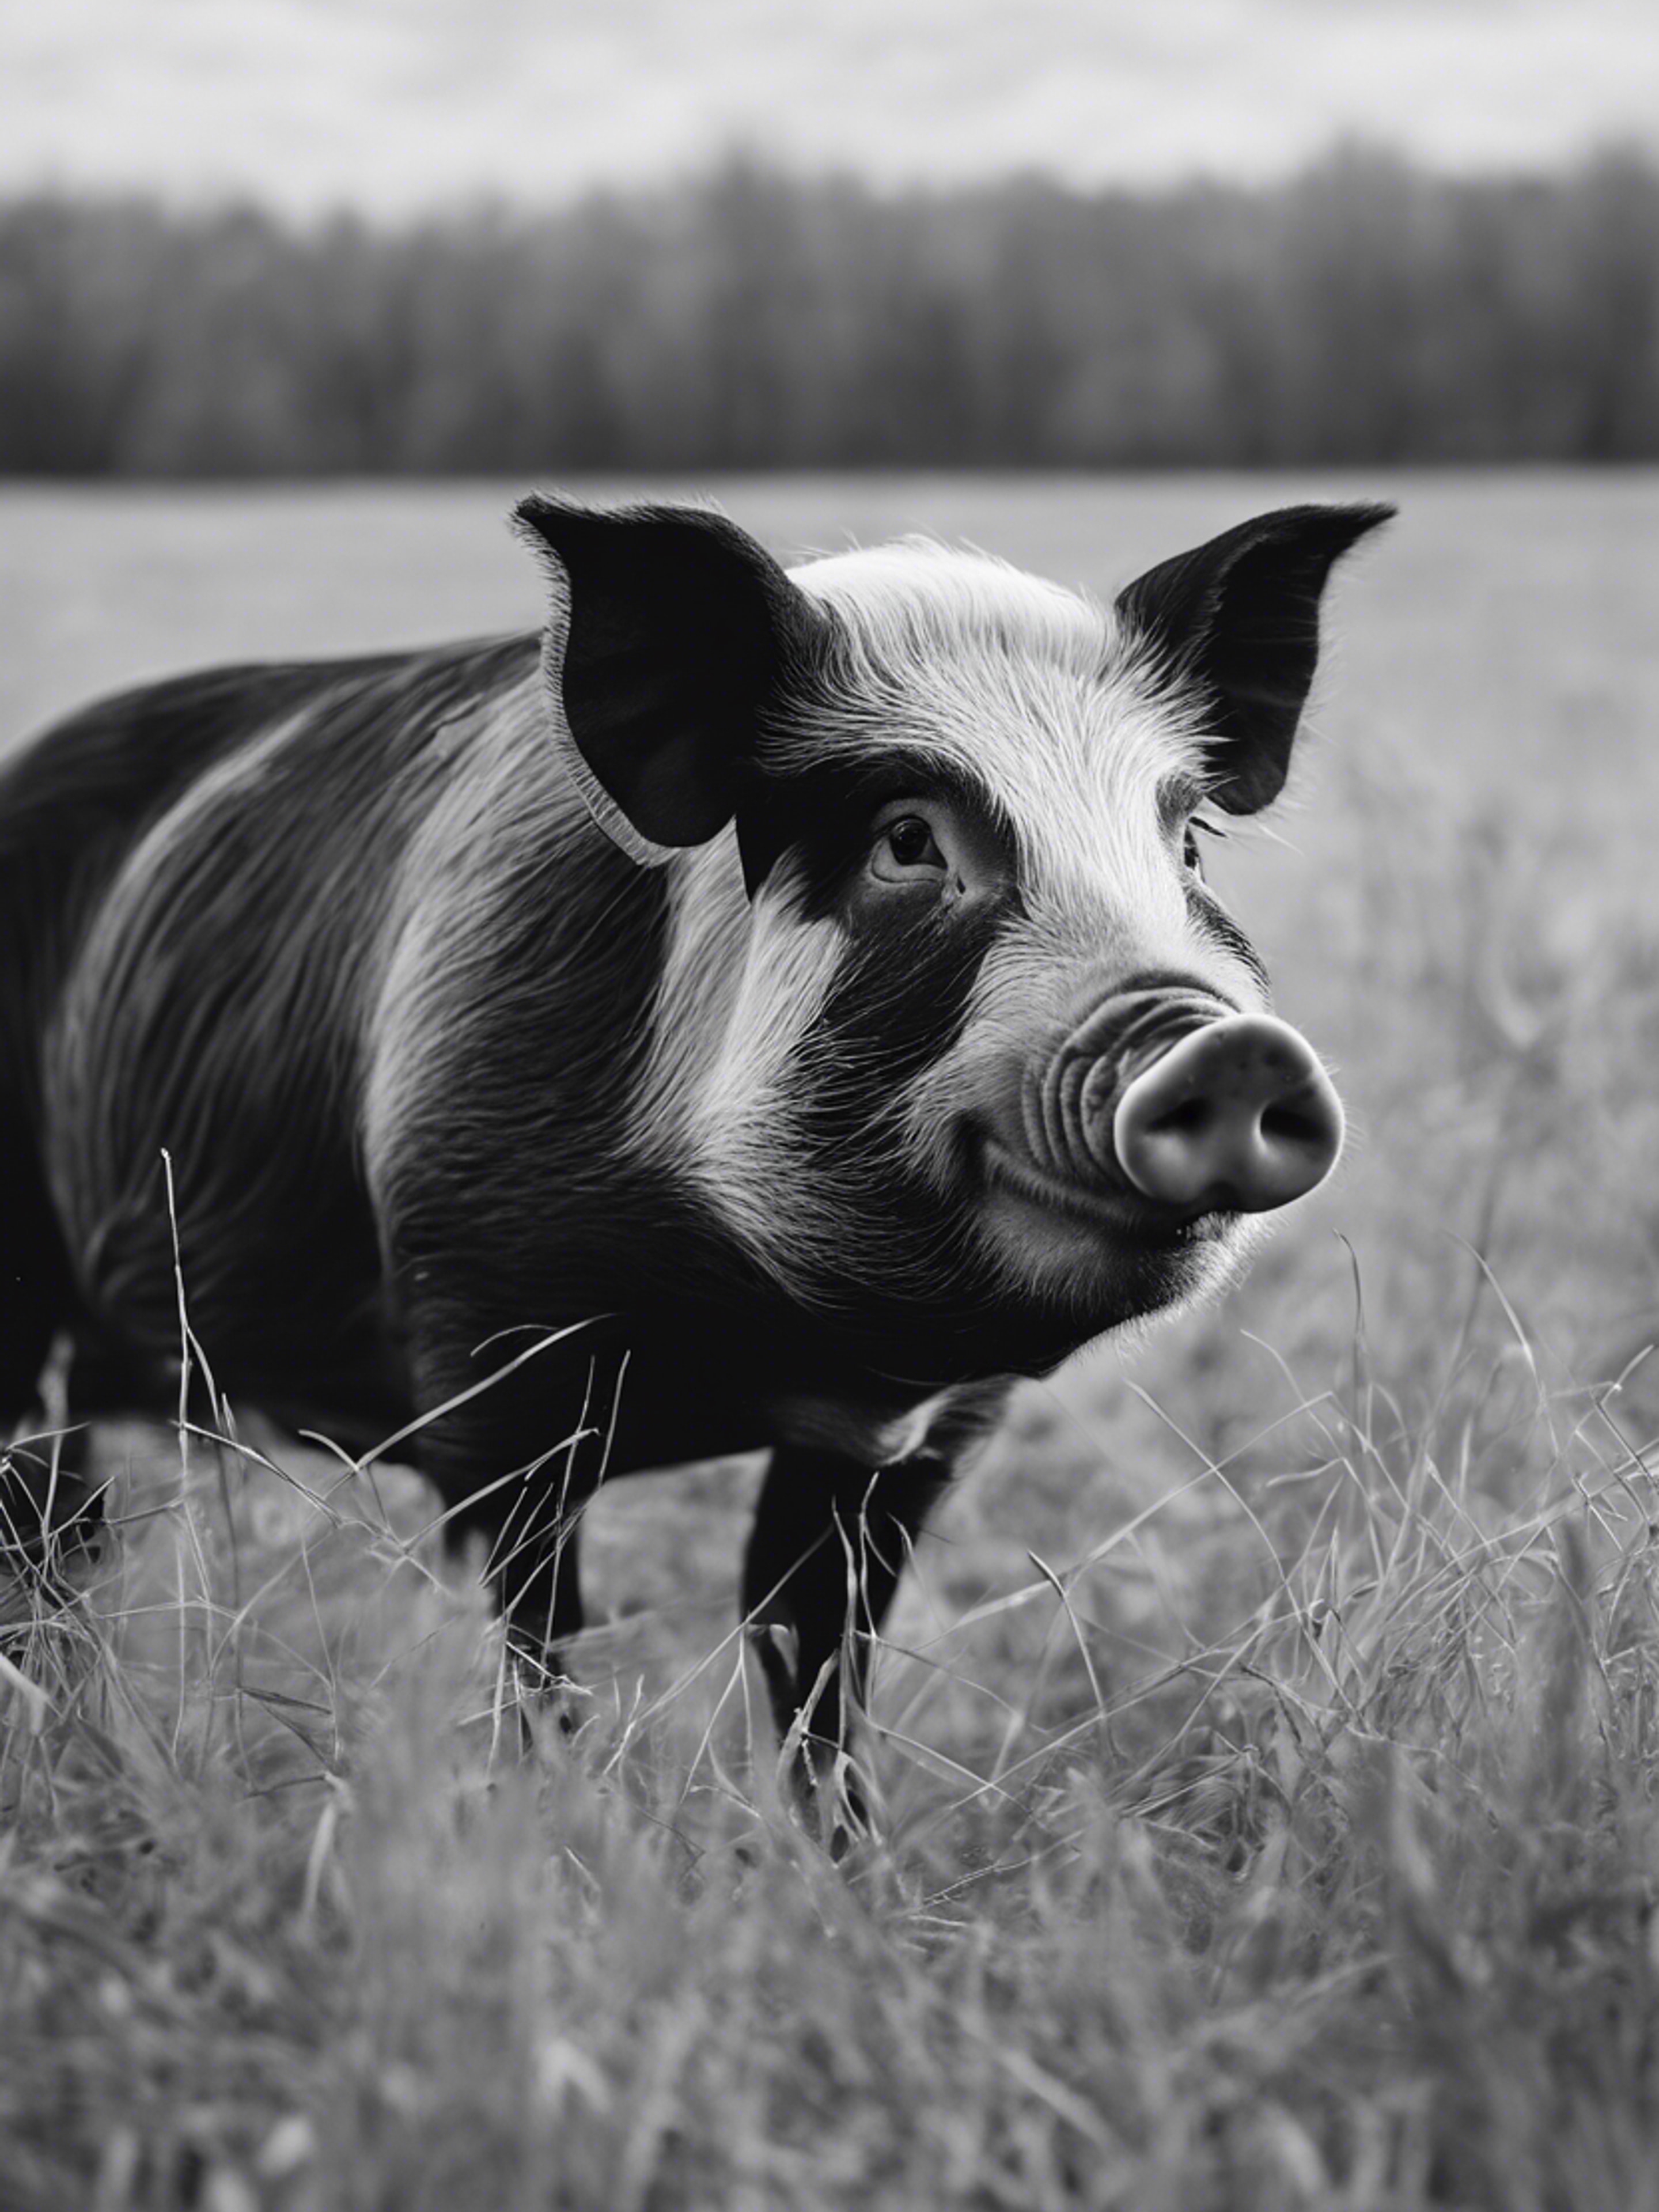 A black and white pig with clean fur, captured in a country meadow during tranquility of winter. Tapet[700eb497dc0e43a8b530]